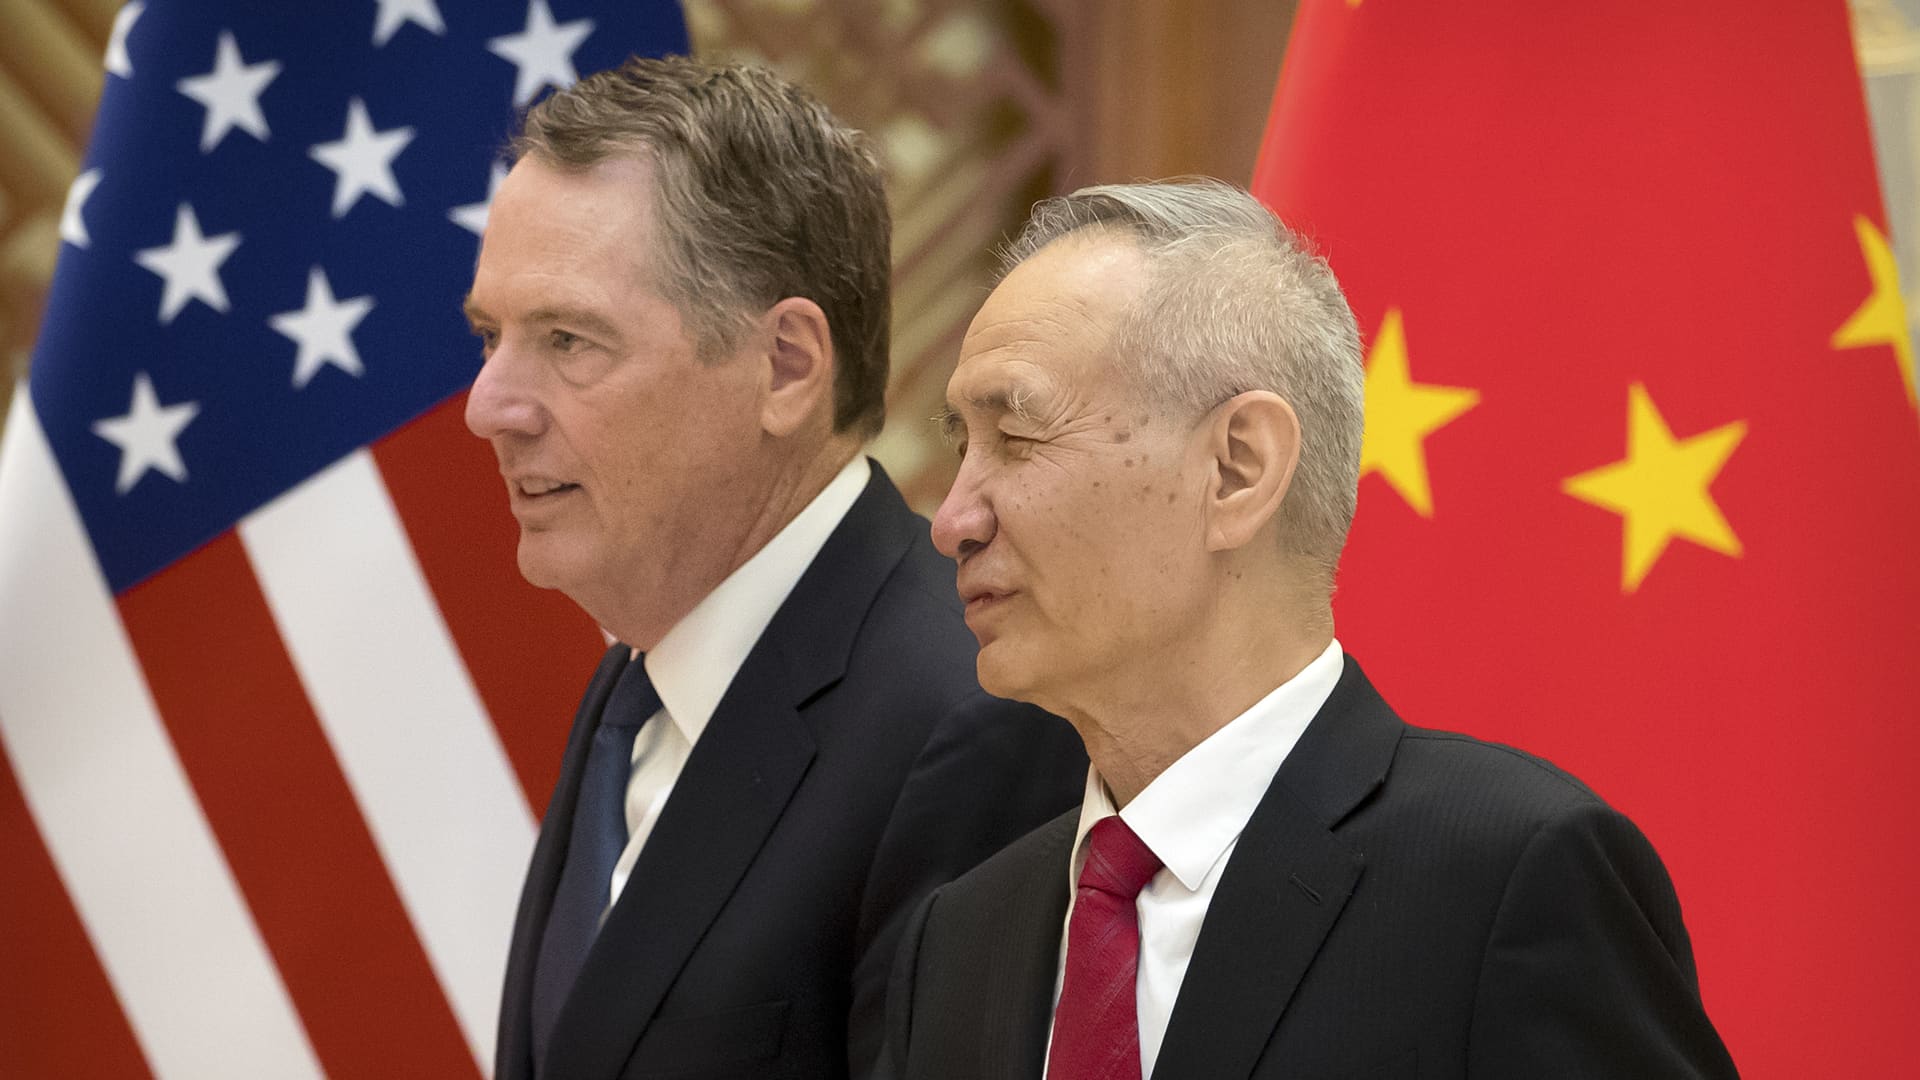 US Trade Representative Robert Lighthizer and Chinese Vice Premier Liu He at the Diaoyutai State Guesthouse in Beijing on Feb. 15, 2019